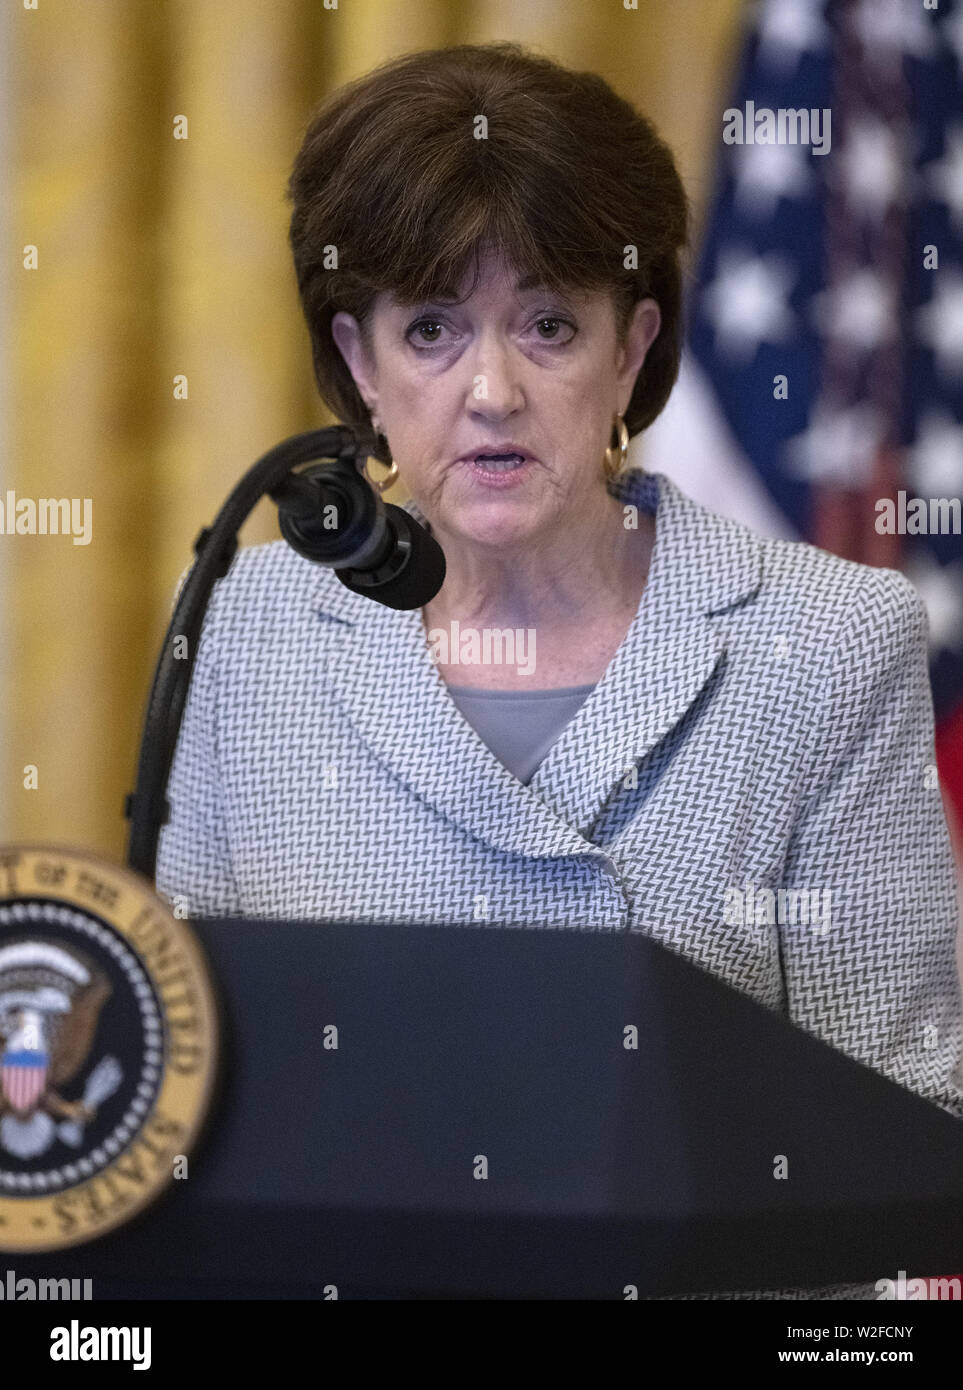 Washington, District of Columbia, USA. 8th July, 2019. Chair of the Council on Environmental Quality Mary Neumayr, makes remarks on "America's Environmental Leadership"" at an event hosted by United States President Donald J. Trump in the East Room of the White House in Washington, DC on Monday, July 8, 2019 Credit: Ron Sachs/CNP/ZUMA Wire/Alamy Live News Stock Photo